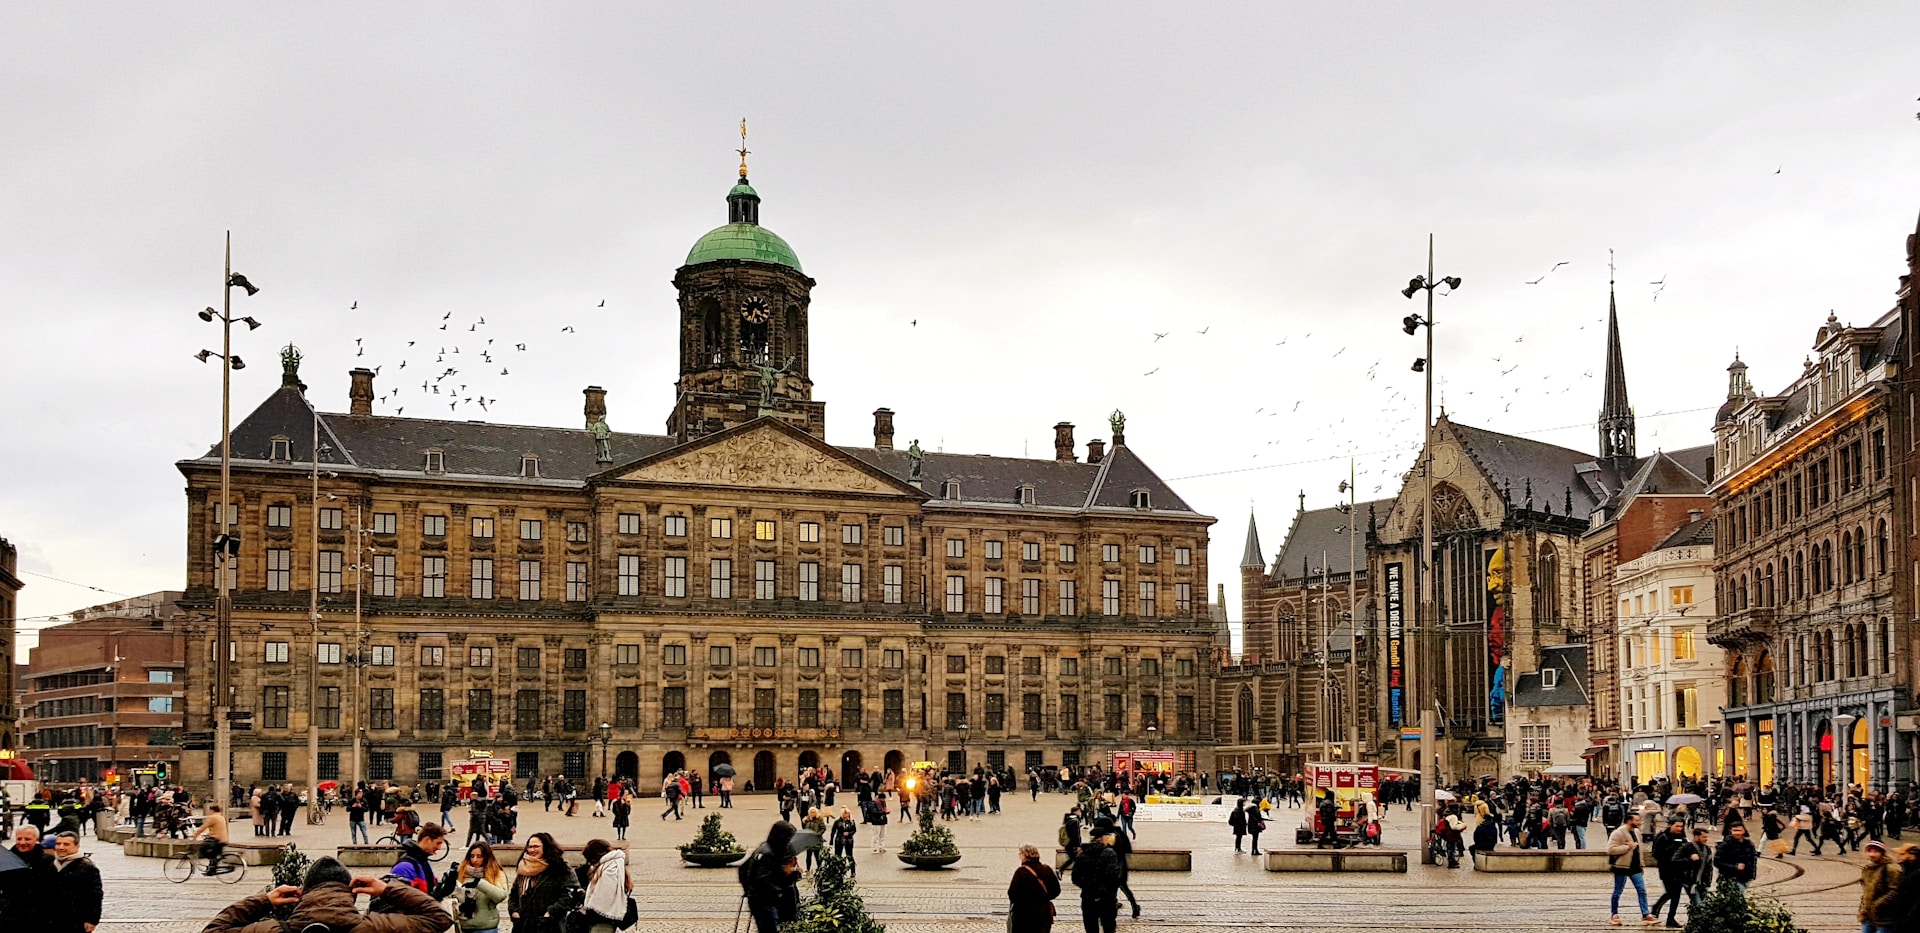 Royal Palace Amsterdam, Netherlands tourist attractions